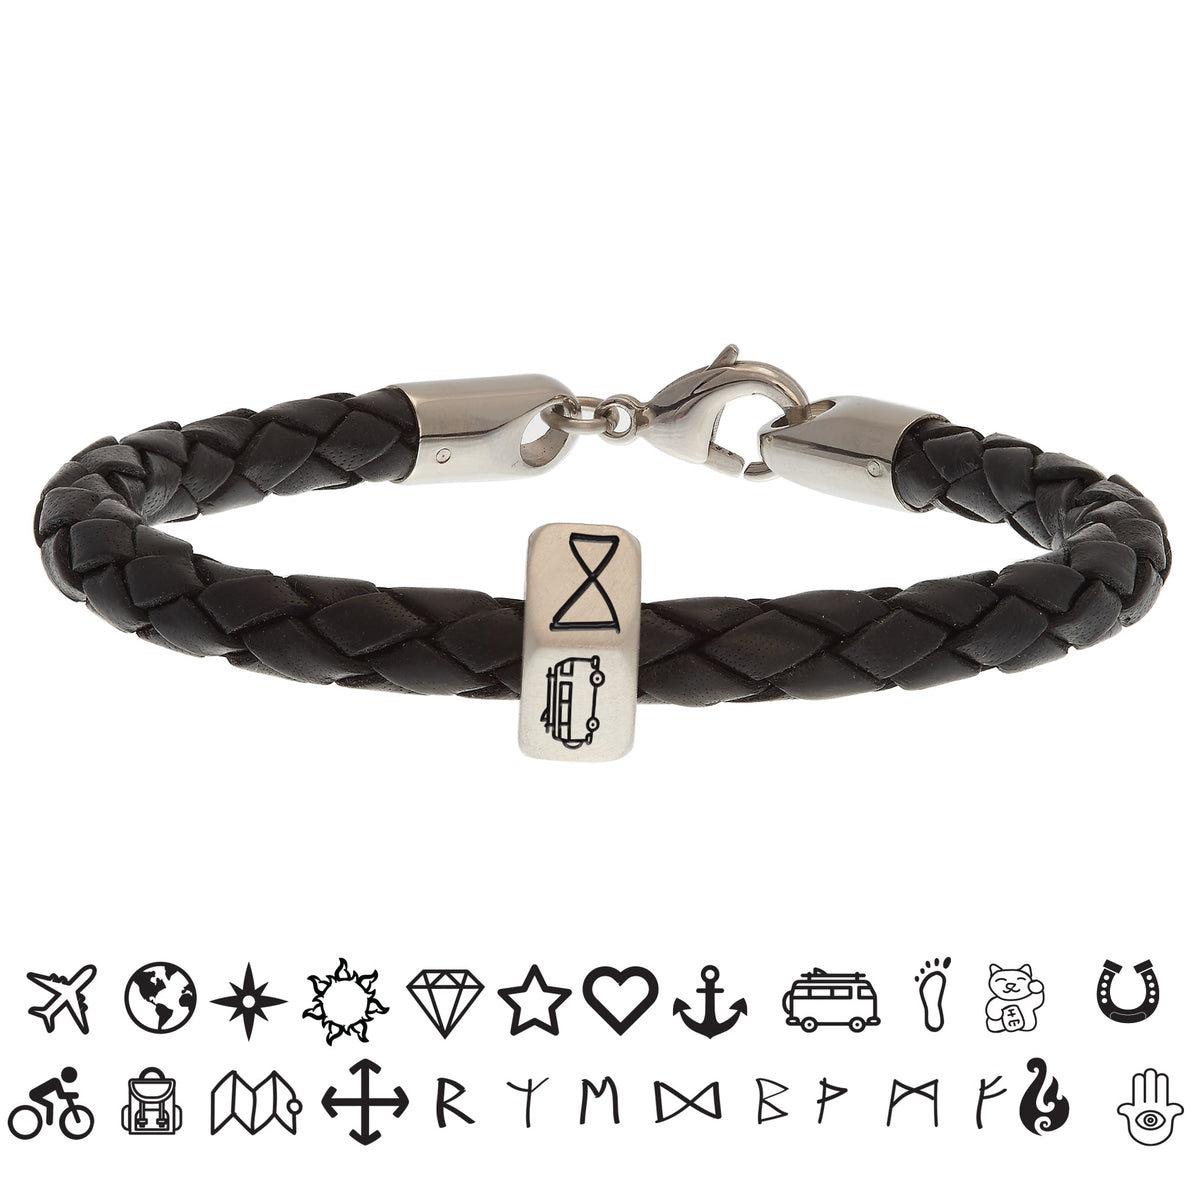 Personalised Travel Symbols Silver and Leather Bracelet